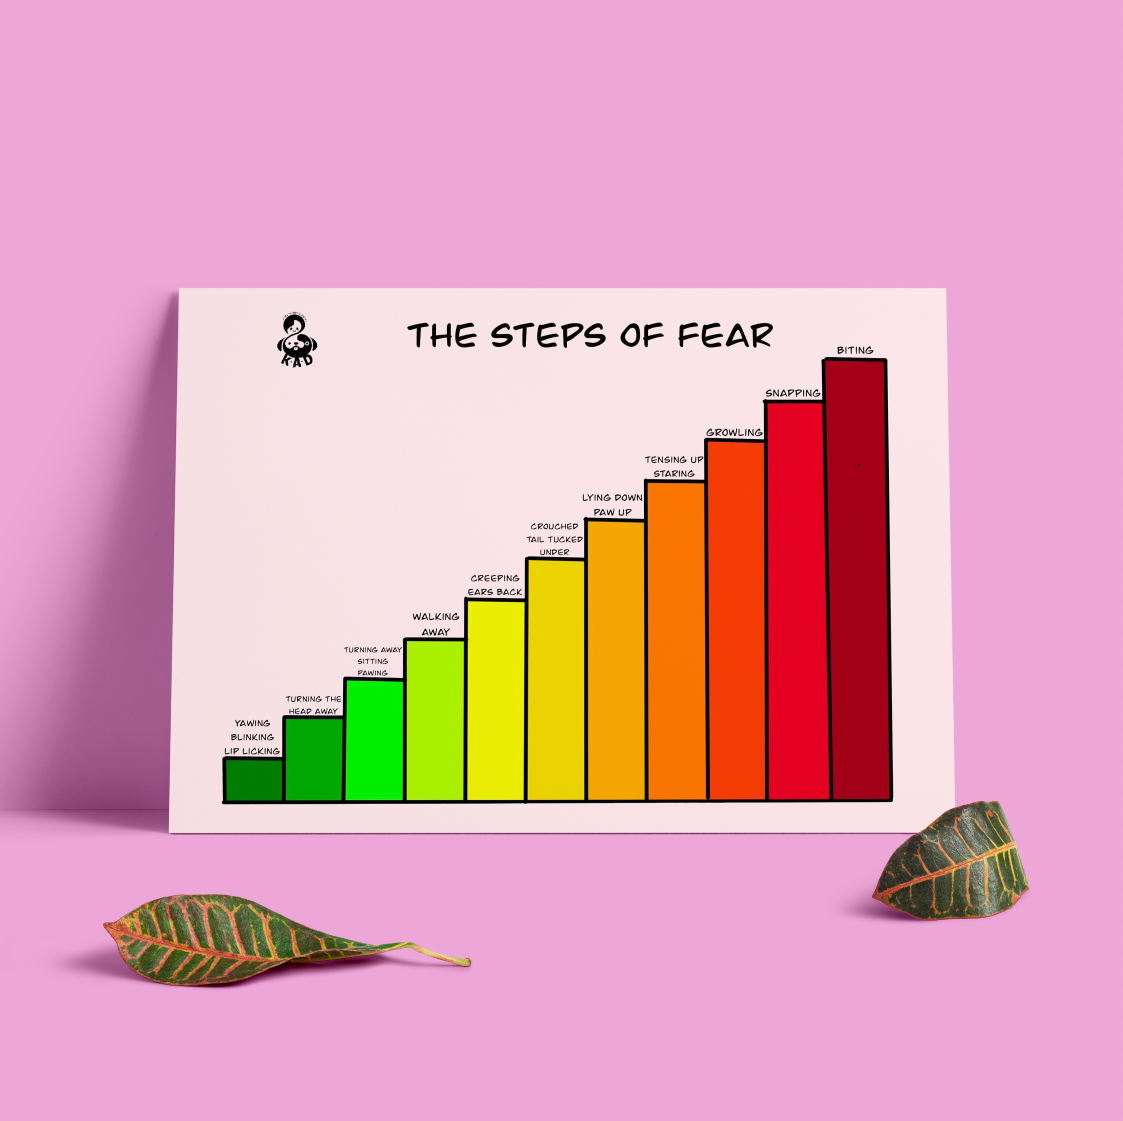 The Steps of Fear